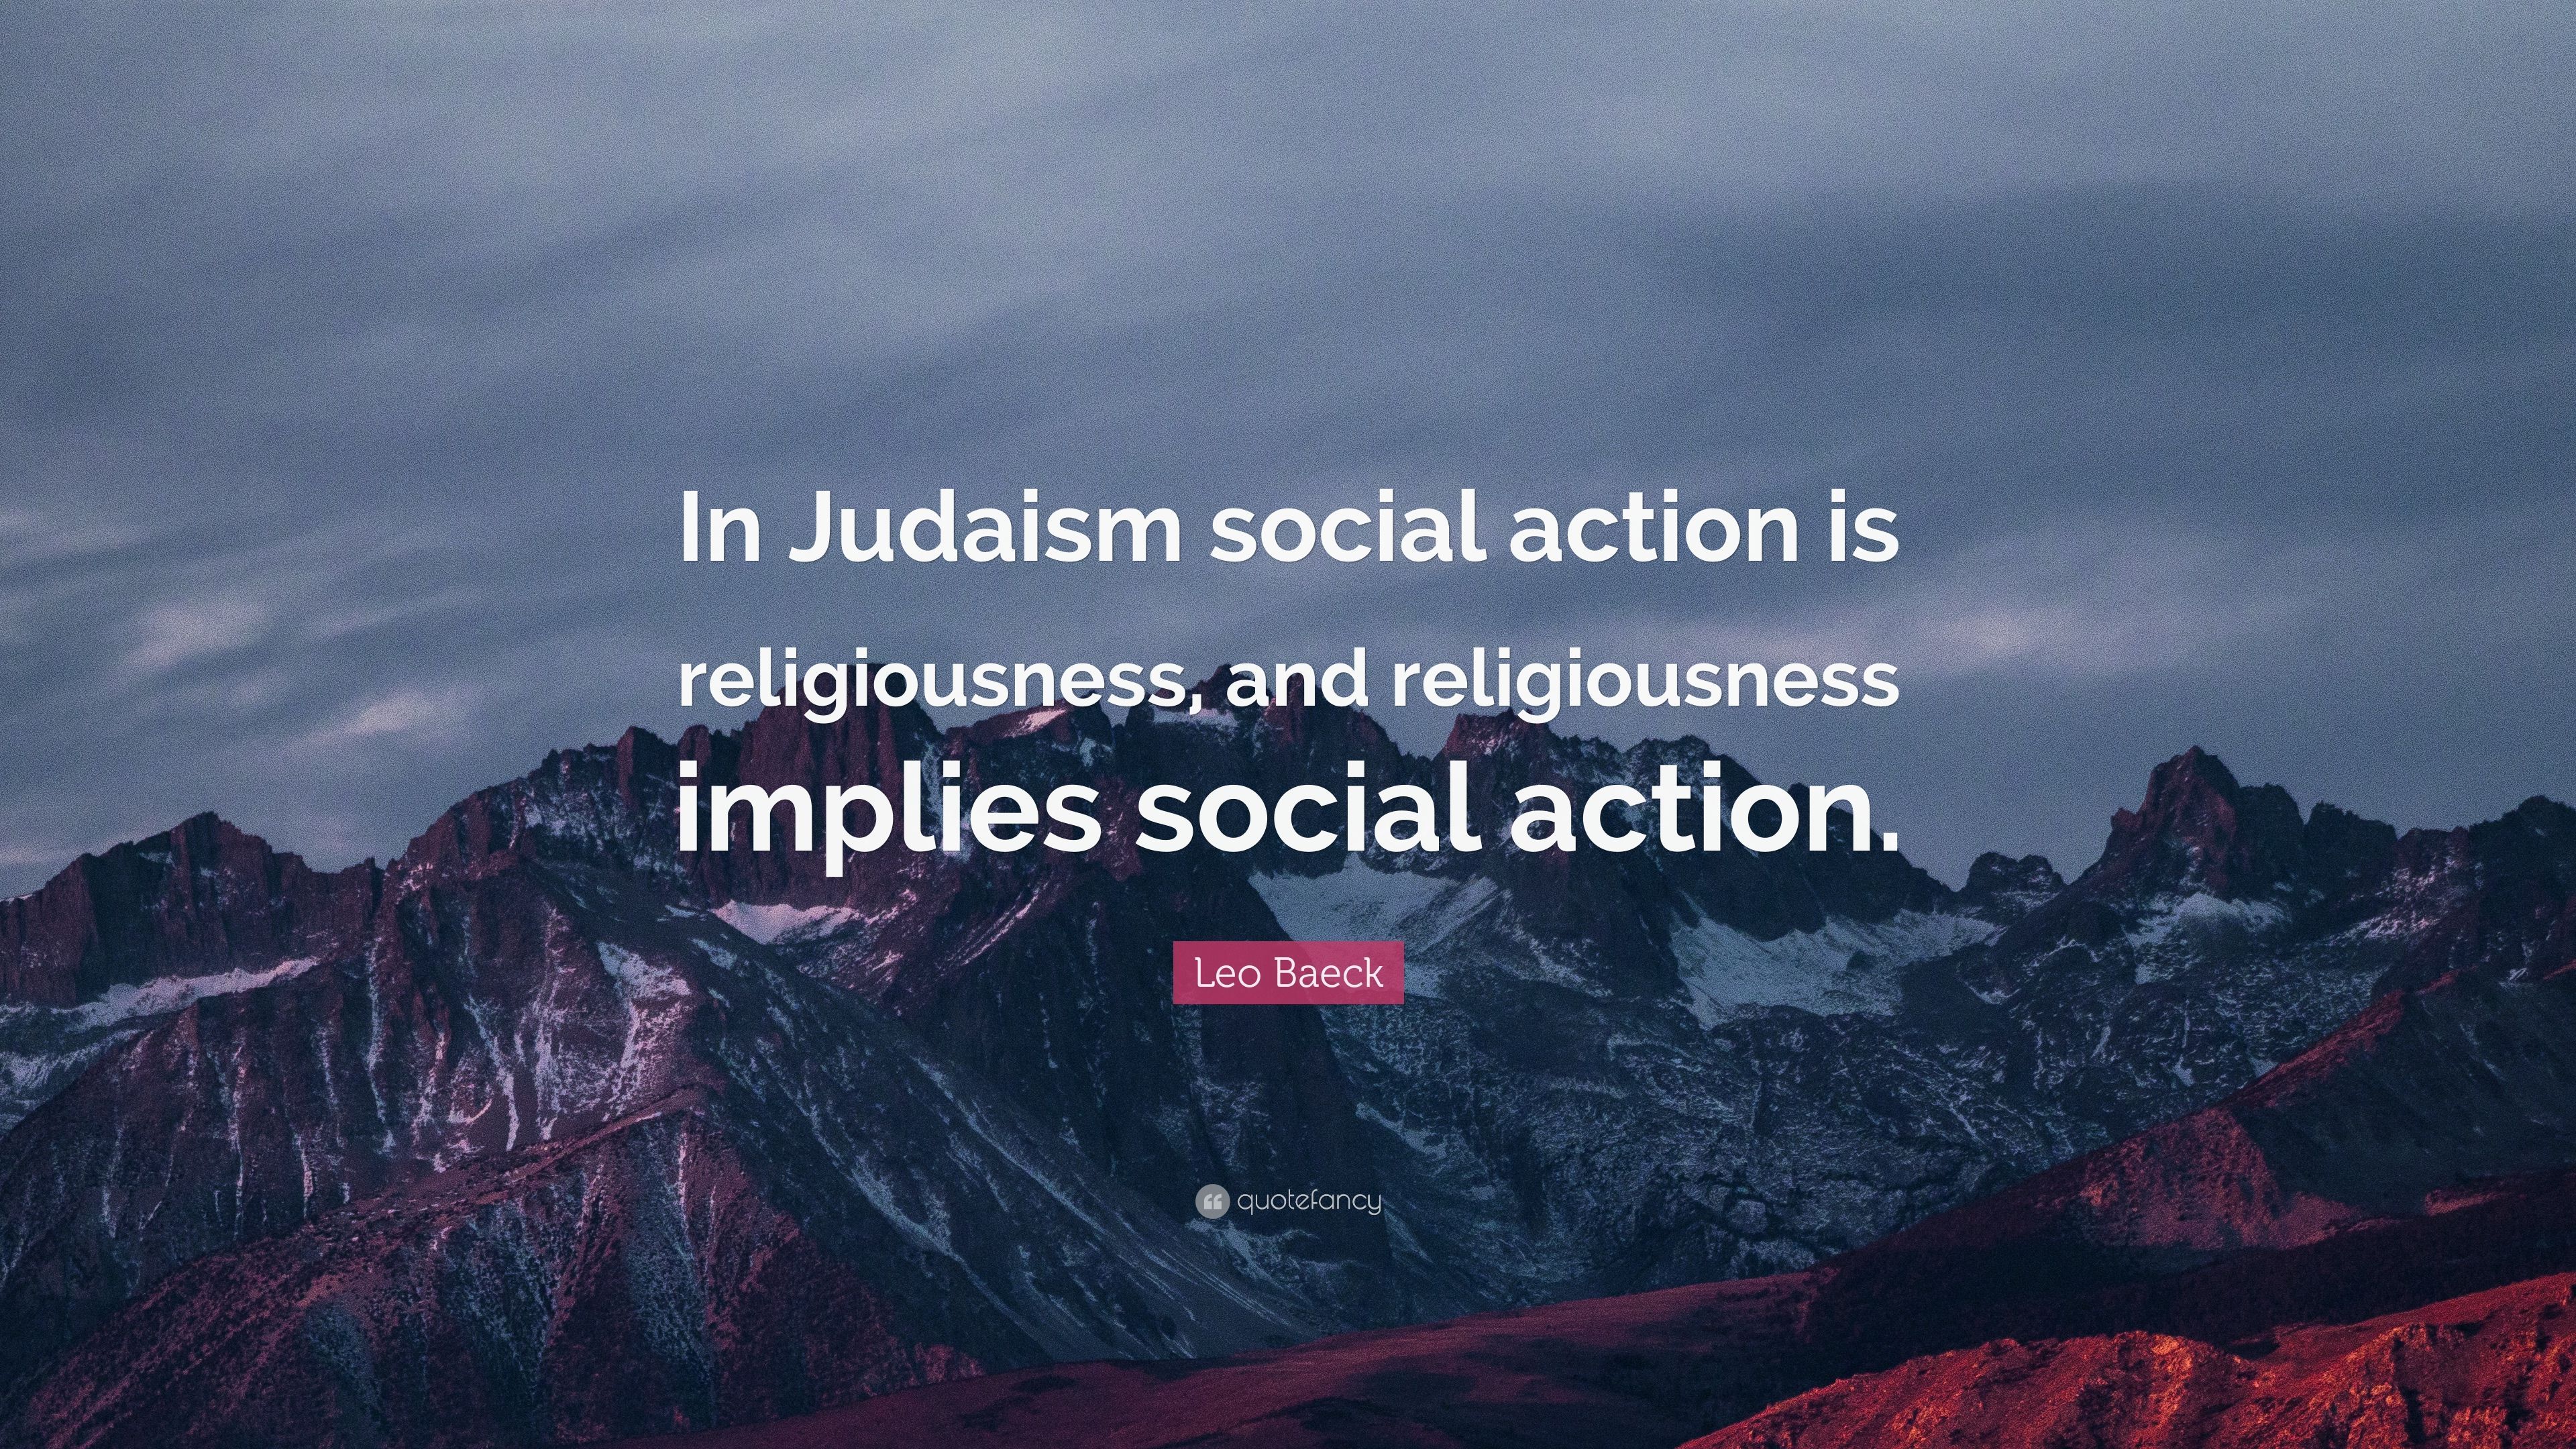 Leo Baeck Quote: “In Judaism social action is religiousness